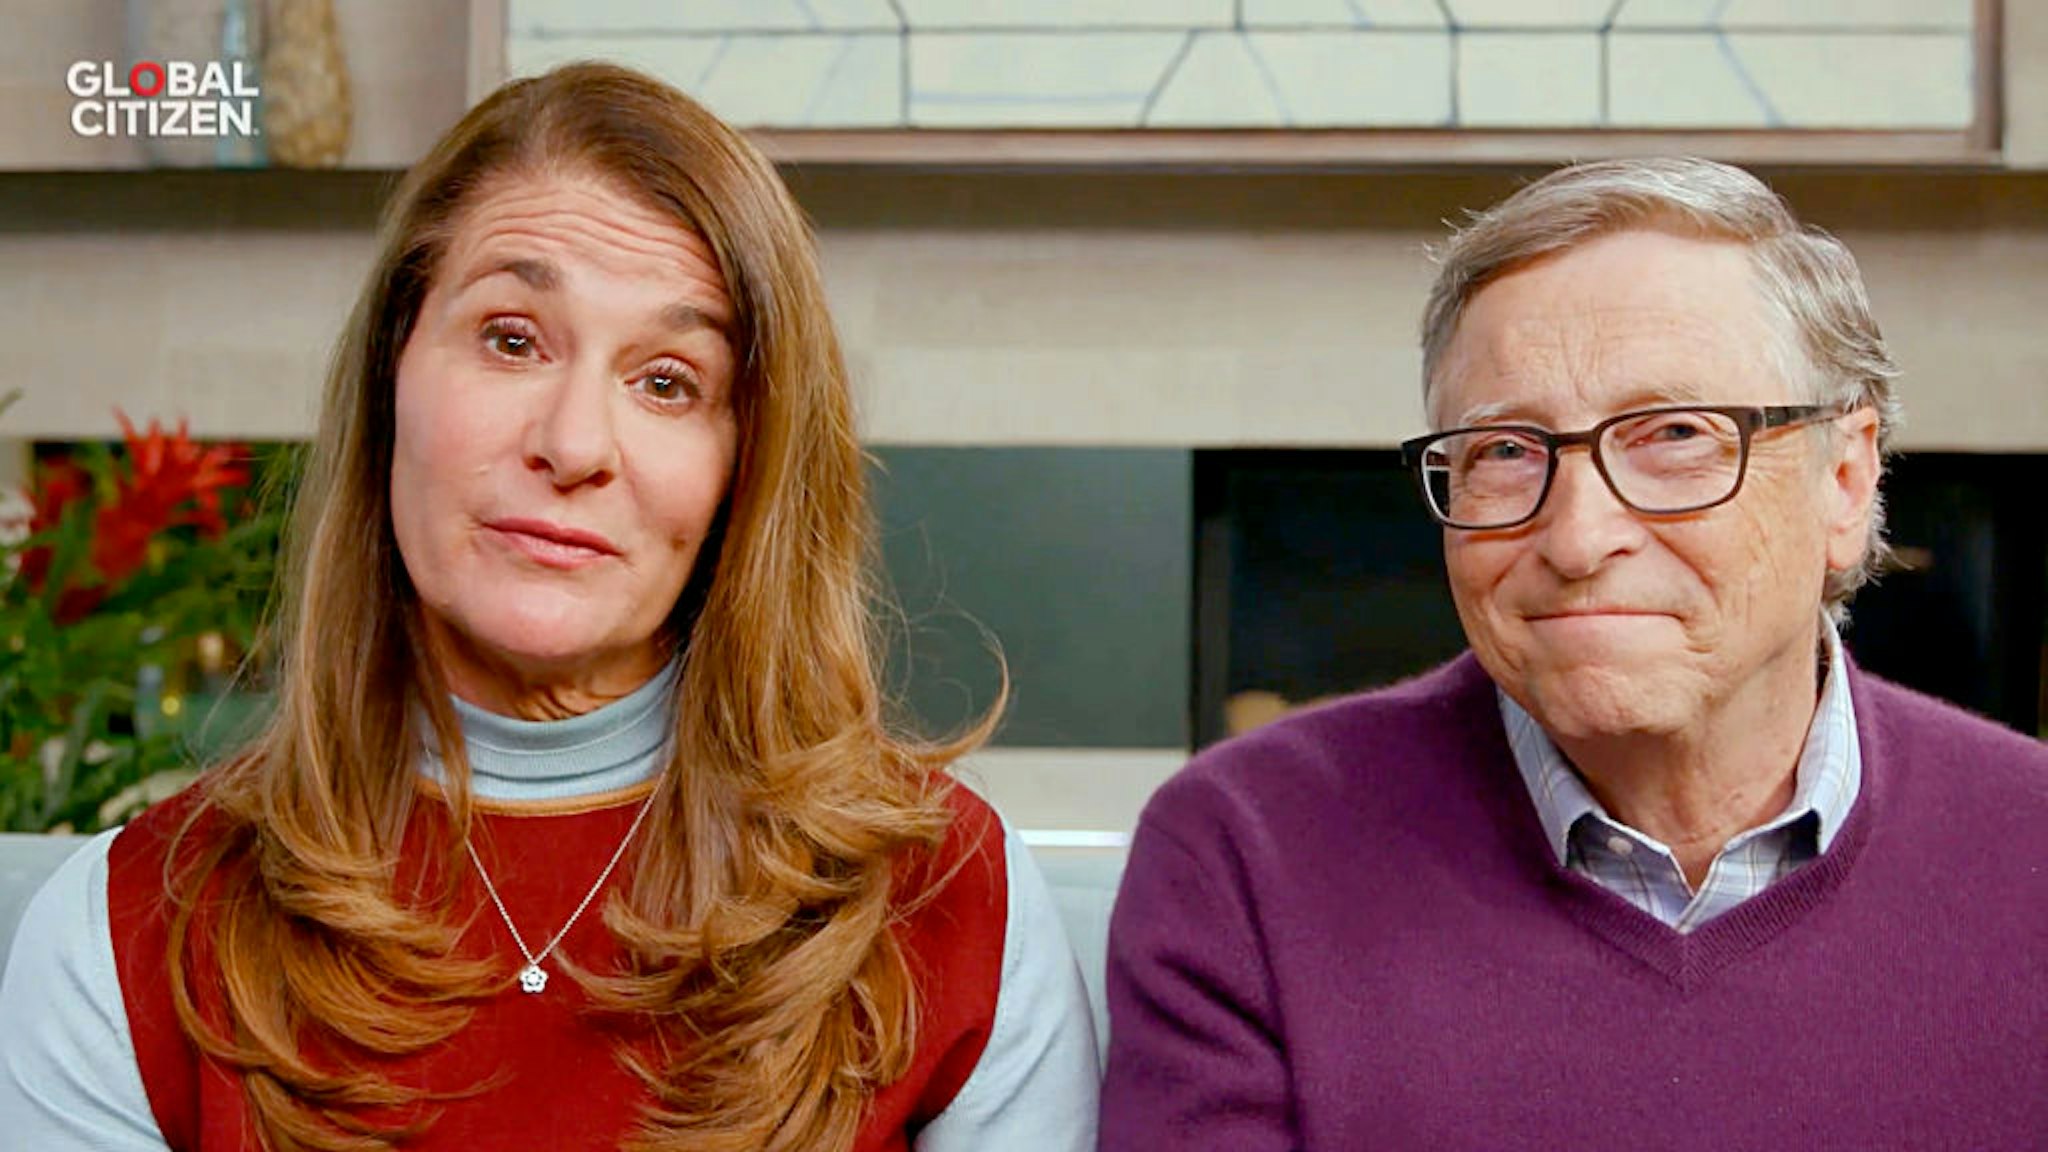 In this screengrab, (L-R) Melinda Gates and Bill Gates speak during "One World: Together At Home" presented by Global Citizen on April, 18, 2020.